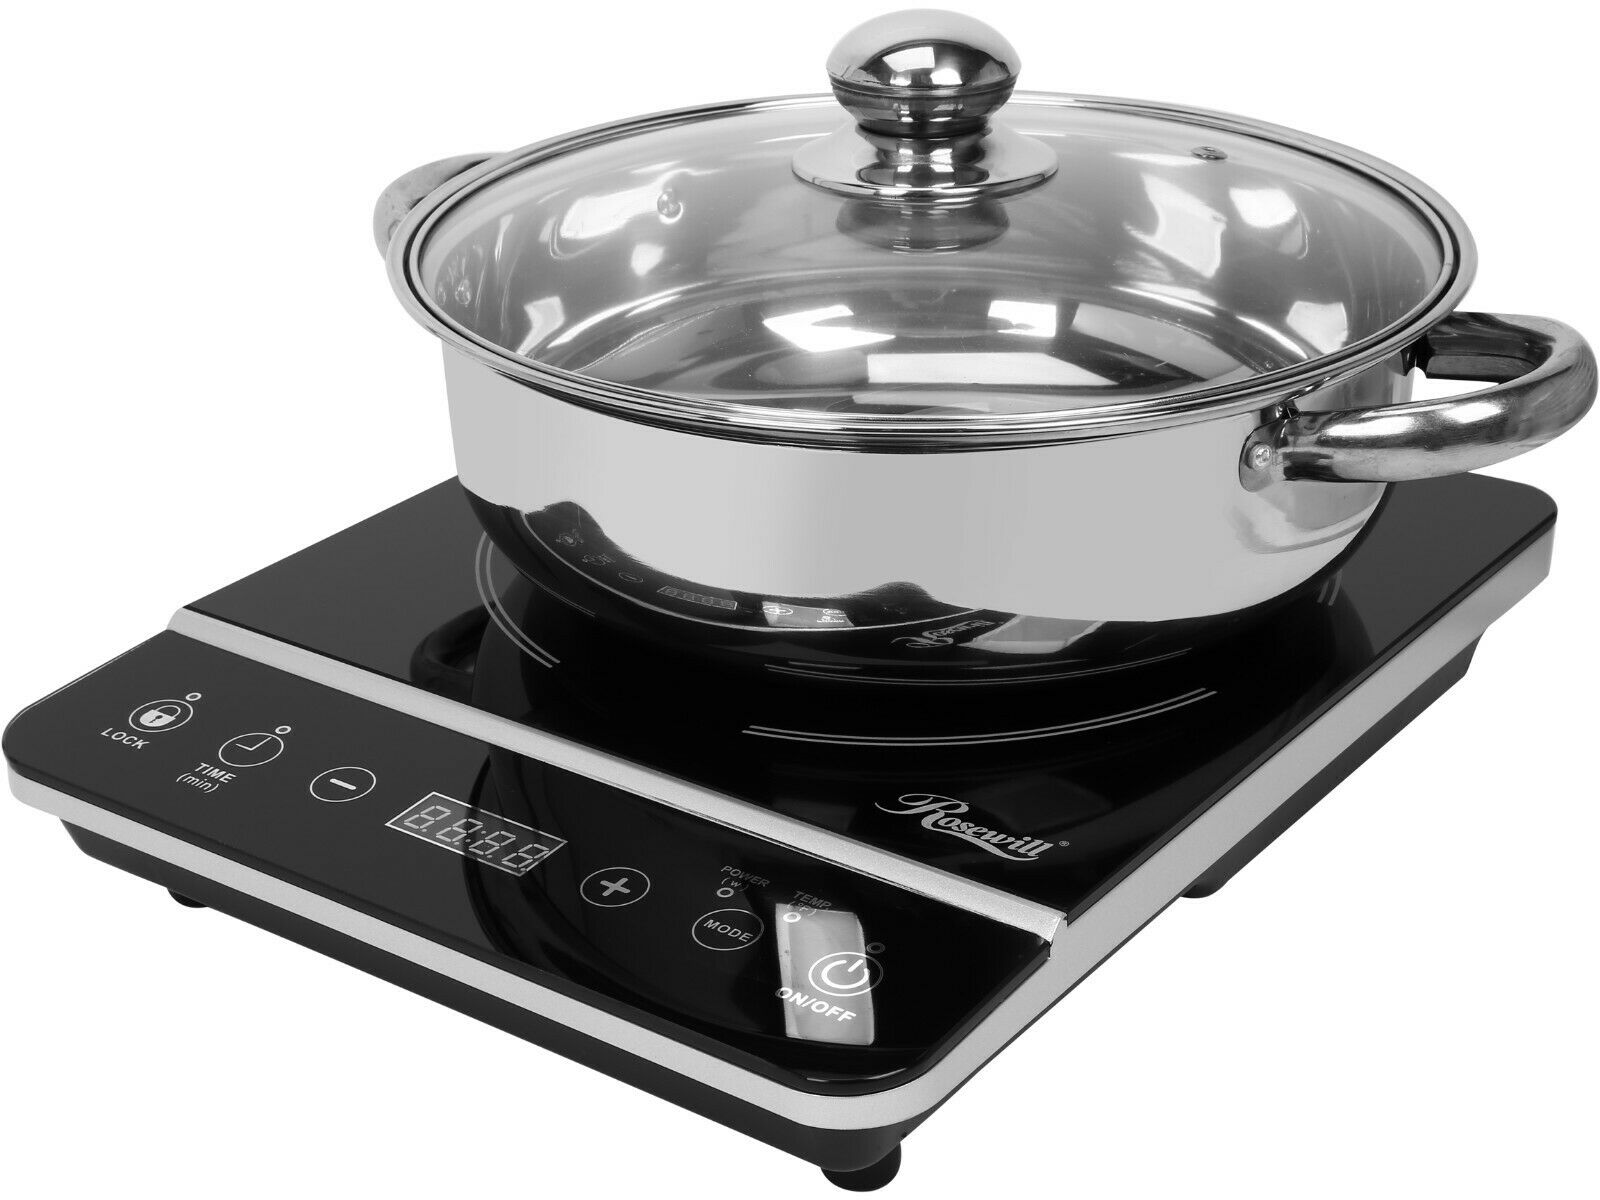 Rosewill 1800w Induction Cooker W/ Steel Pot 10' 3.5qt - Black